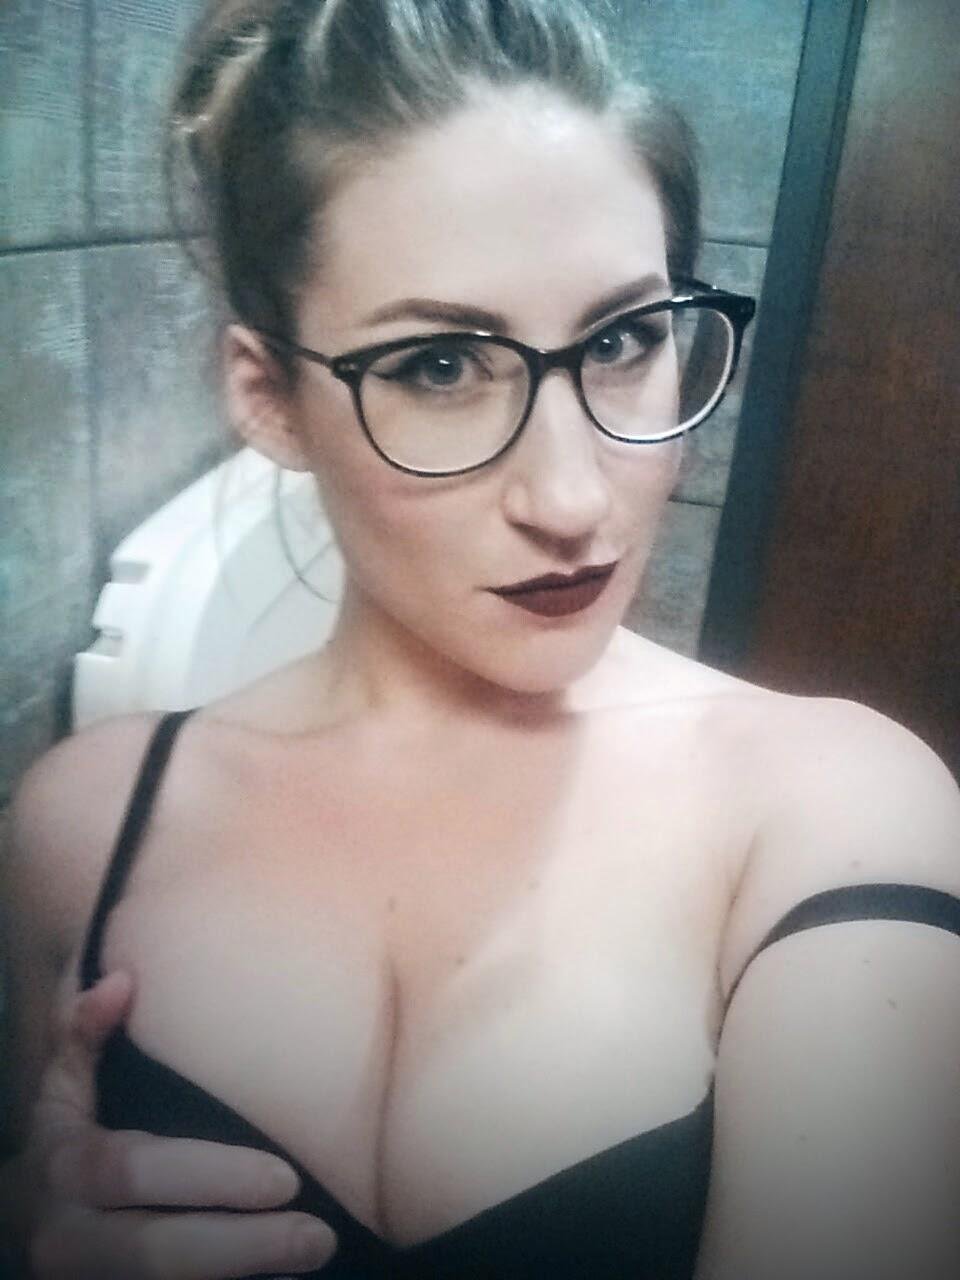 By popular demand, glasses. 